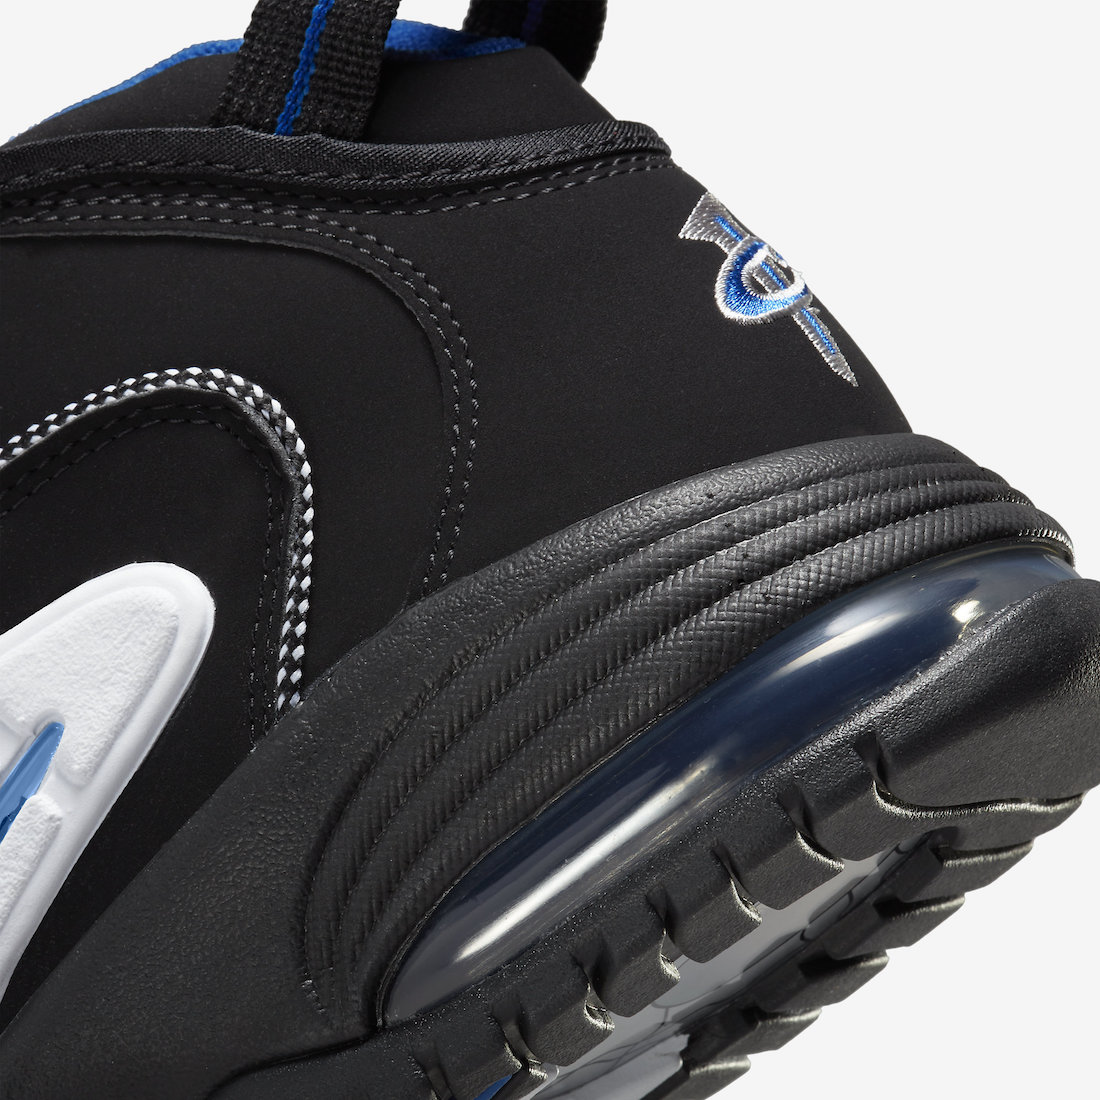 Nike-Air-Max-Penny-1-Orlando-2022-DN2487-001-Release-Date-7